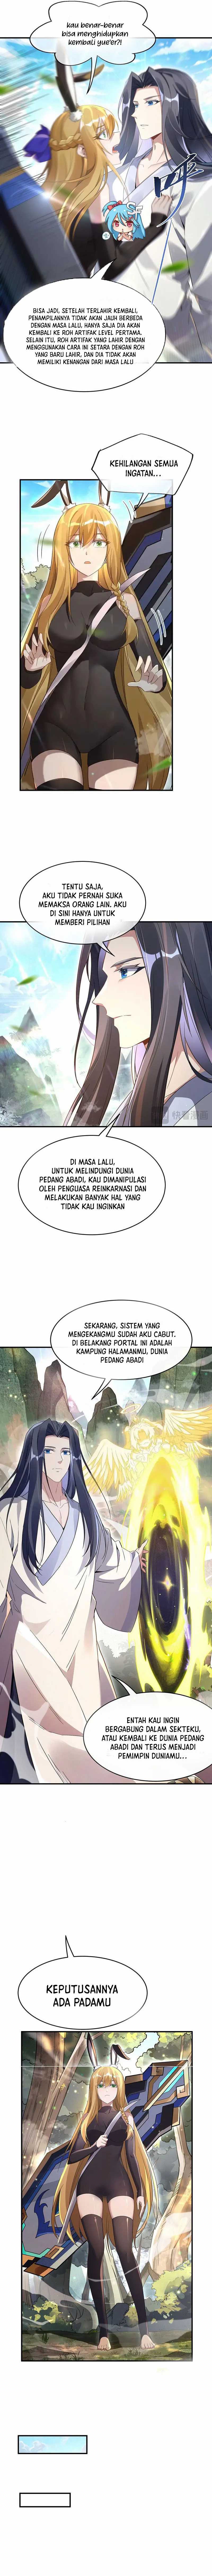 Dilarang COPAS - situs resmi www.mangacanblog.com - Komik my female apprentices are all big shots from the future 236 - chapter 236 237 Indonesia my female apprentices are all big shots from the future 236 - chapter 236 Terbaru 6|Baca Manga Komik Indonesia|Mangacan